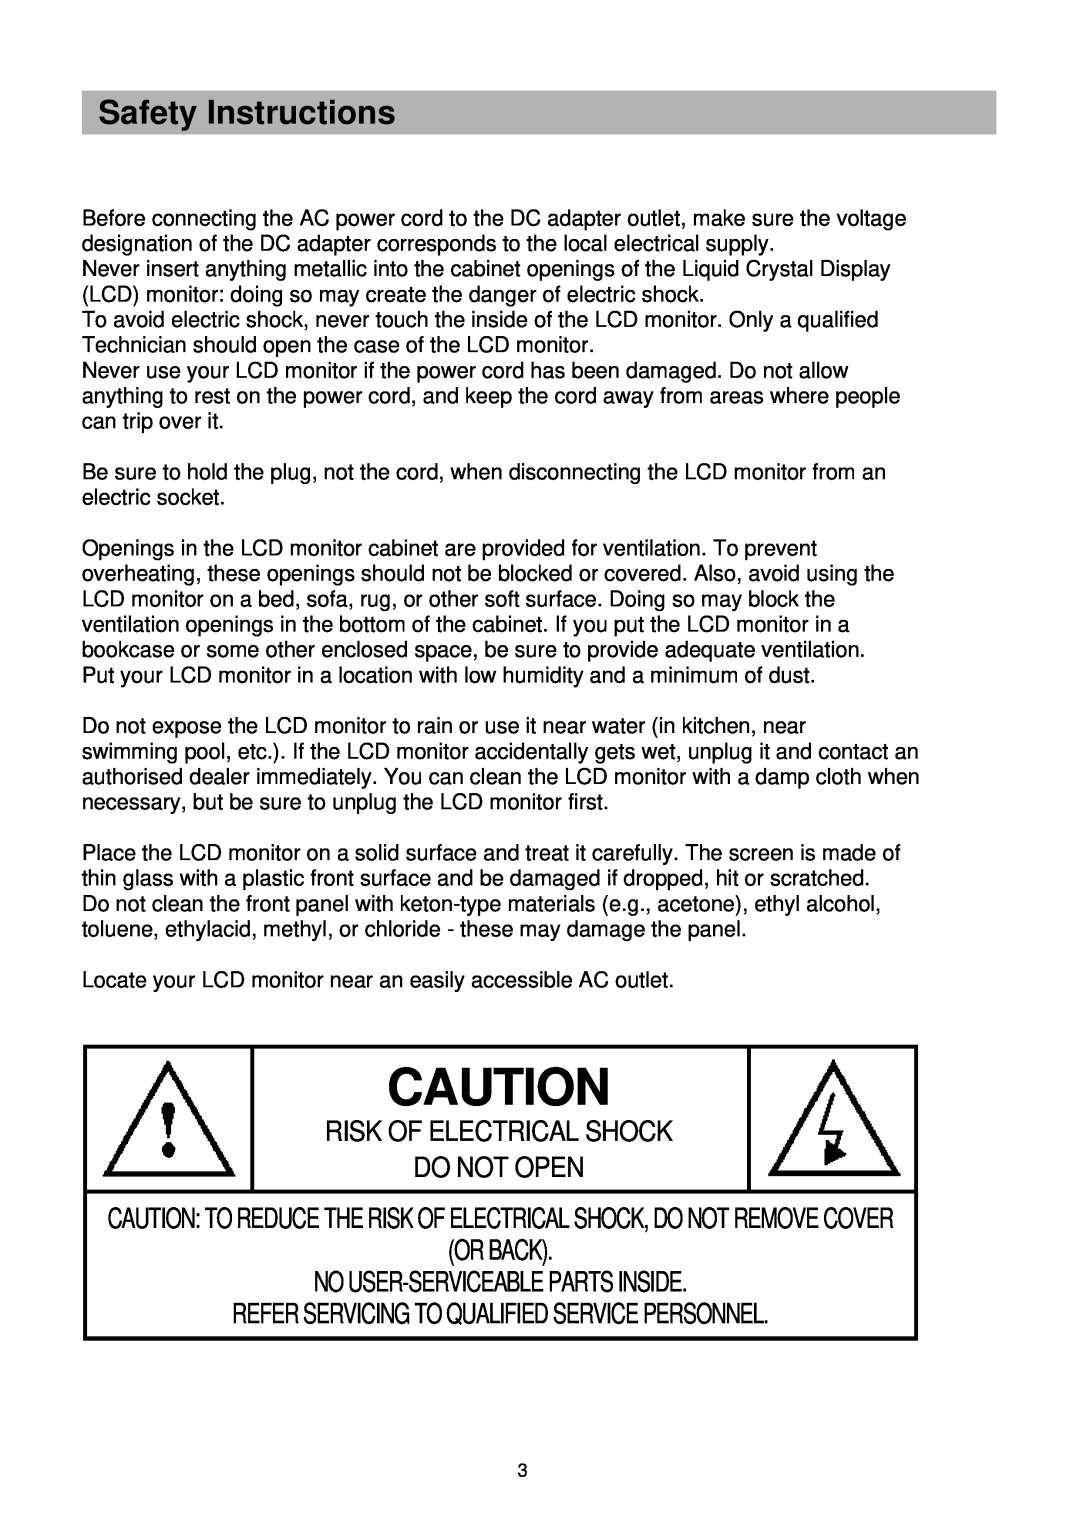 Palsonic TFTV-201 owner manual Safety Instructions, Caution To Reduce The Risk Of Electrical Shock, Do Not Remove Cover 